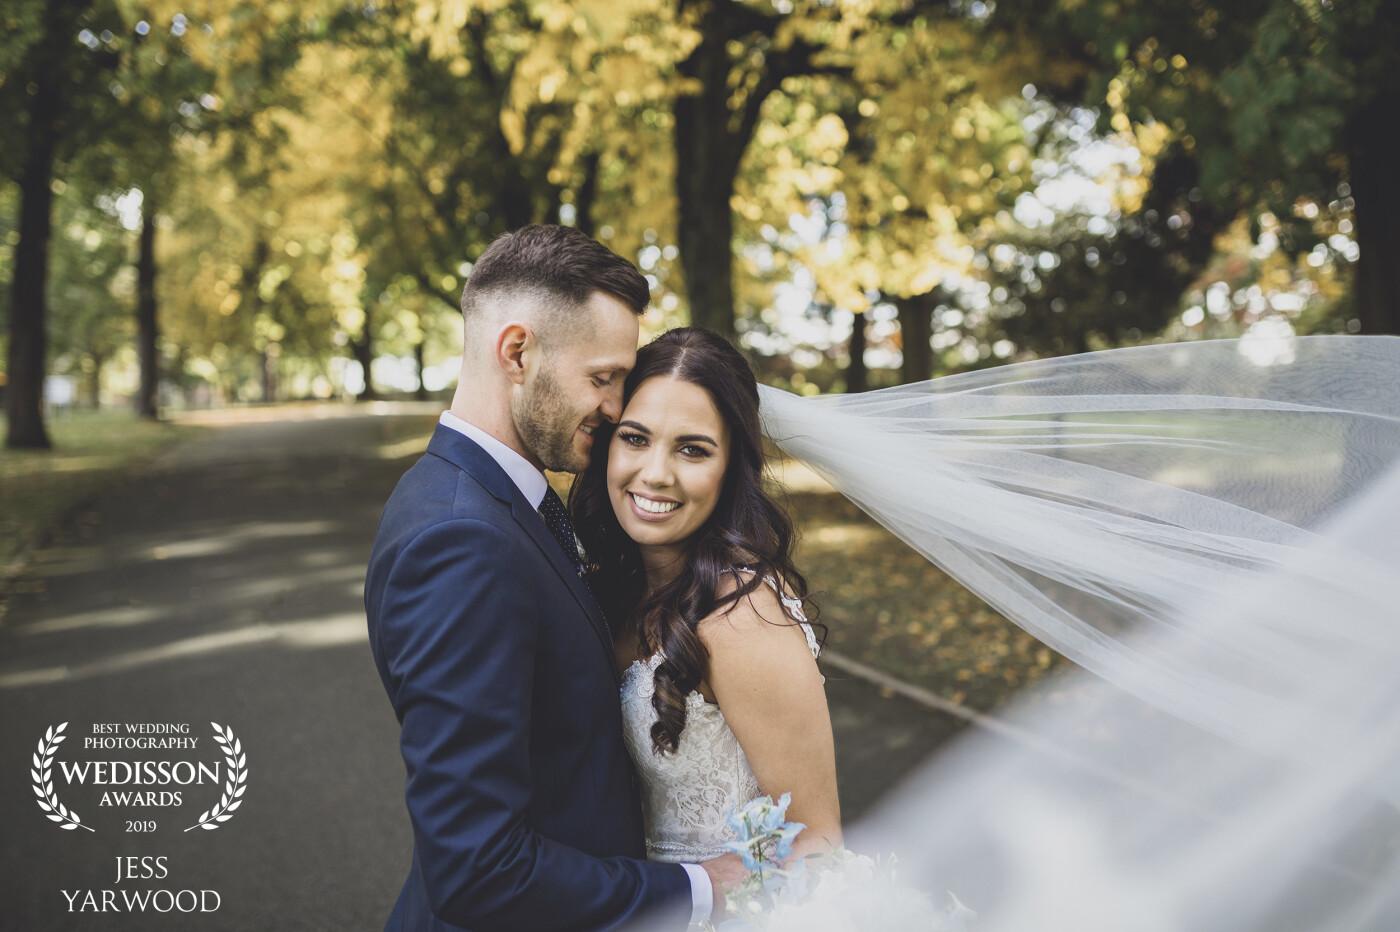 Matt & Pernilla had an autumnal wedding and tied the knot at Colshaw Hall in Cheshire. They wanted the focus to be documenting the day with their friends and family, having a great time! I took them out for 15 minutes for couple portraits and this was one of my favorites.